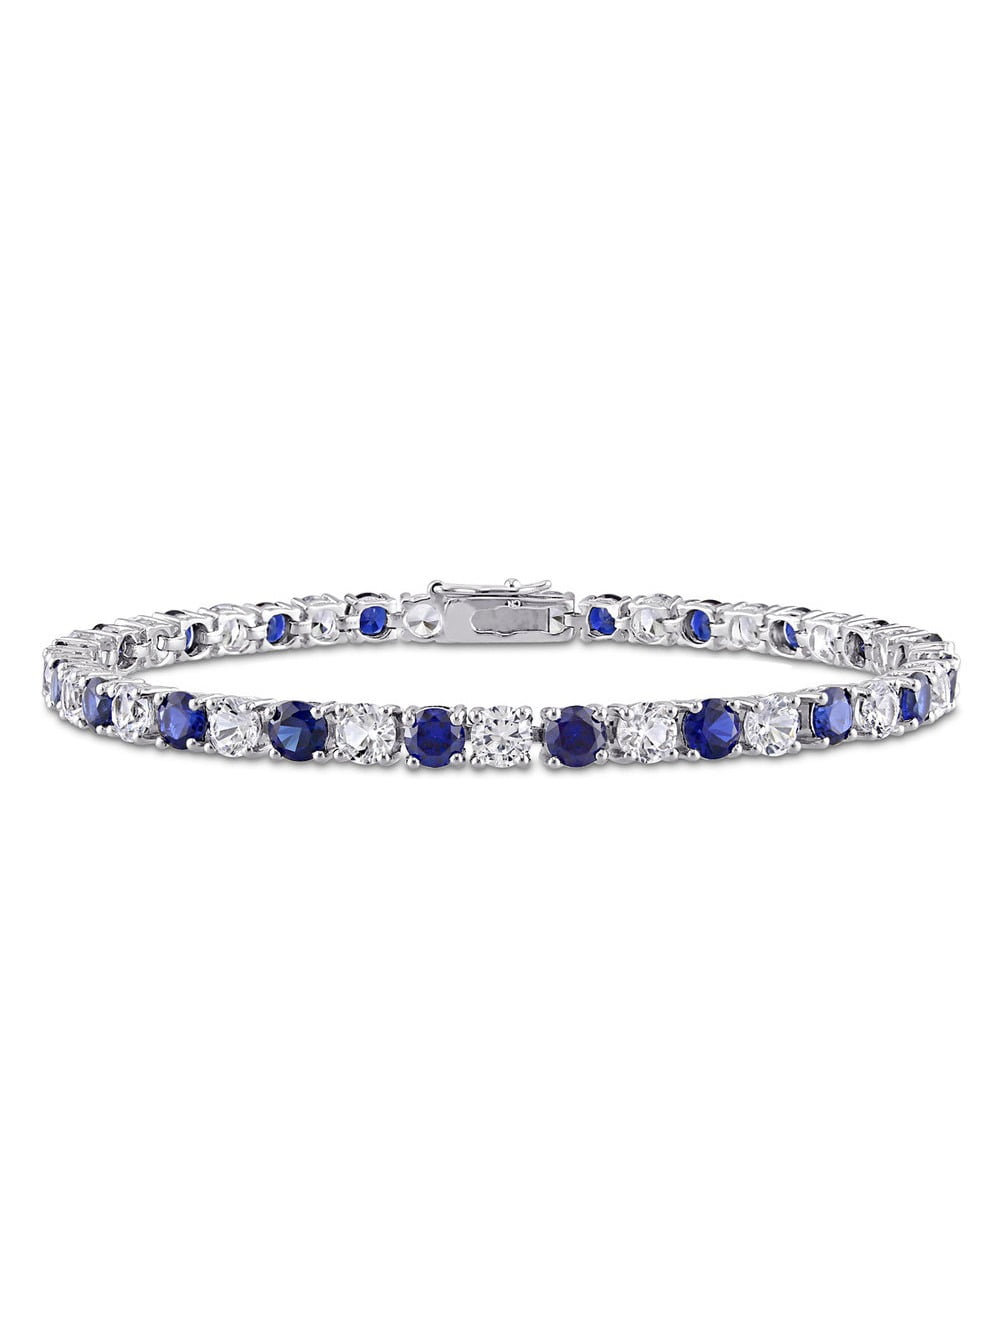 Miabella Women's 32 Carat Created Blue and White Sapphire Sterling